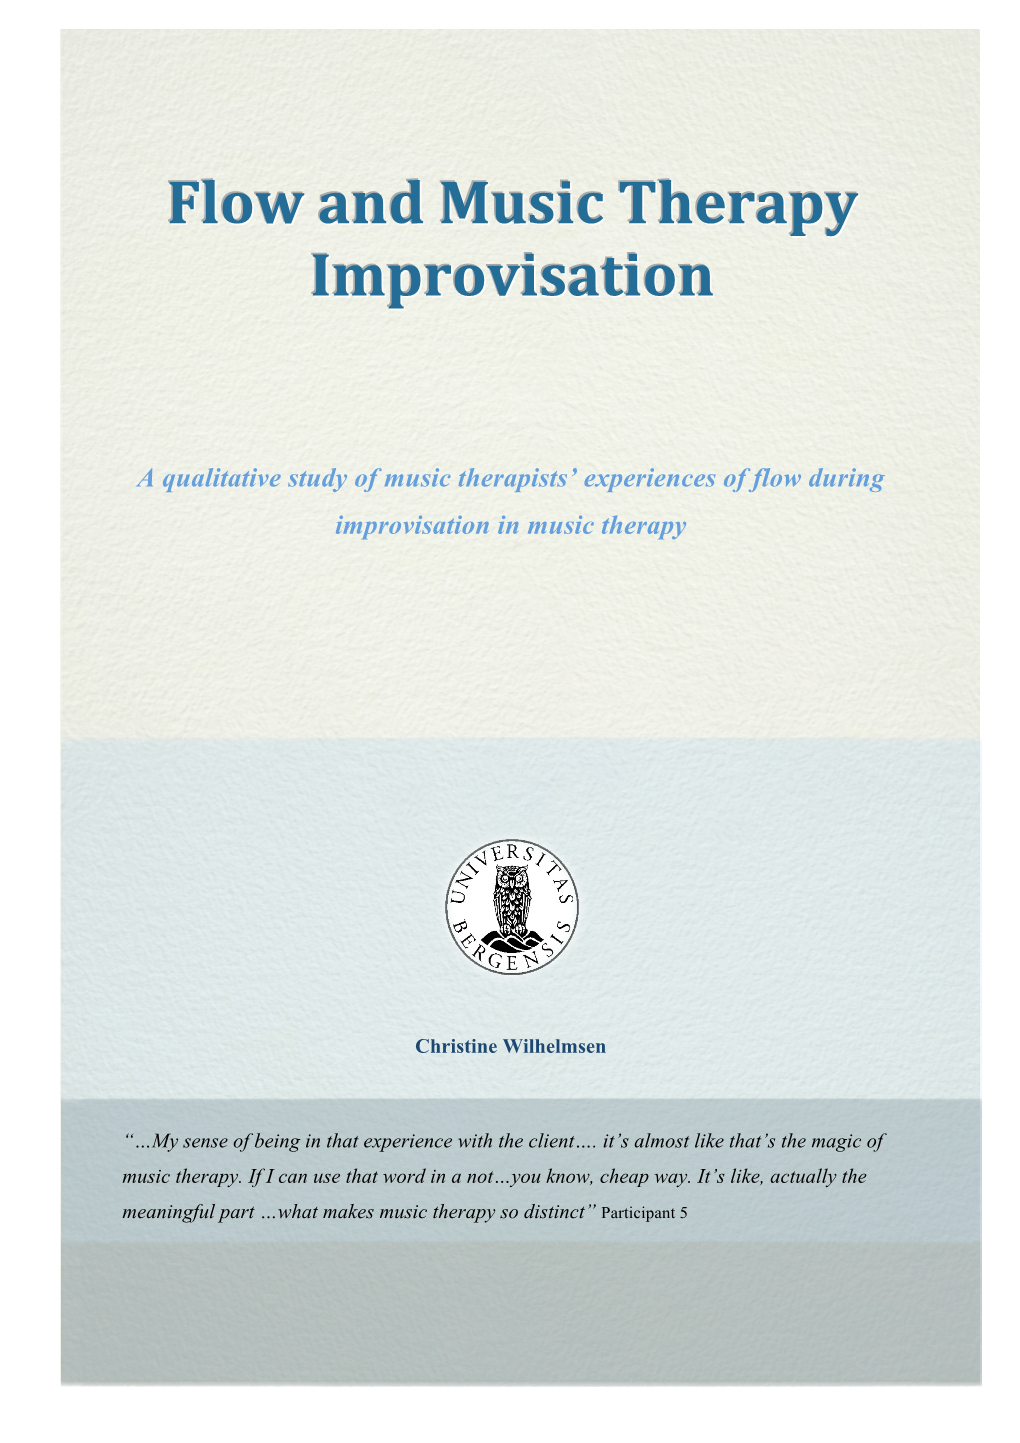 Flow and Music Therapy Improvisation Are Related